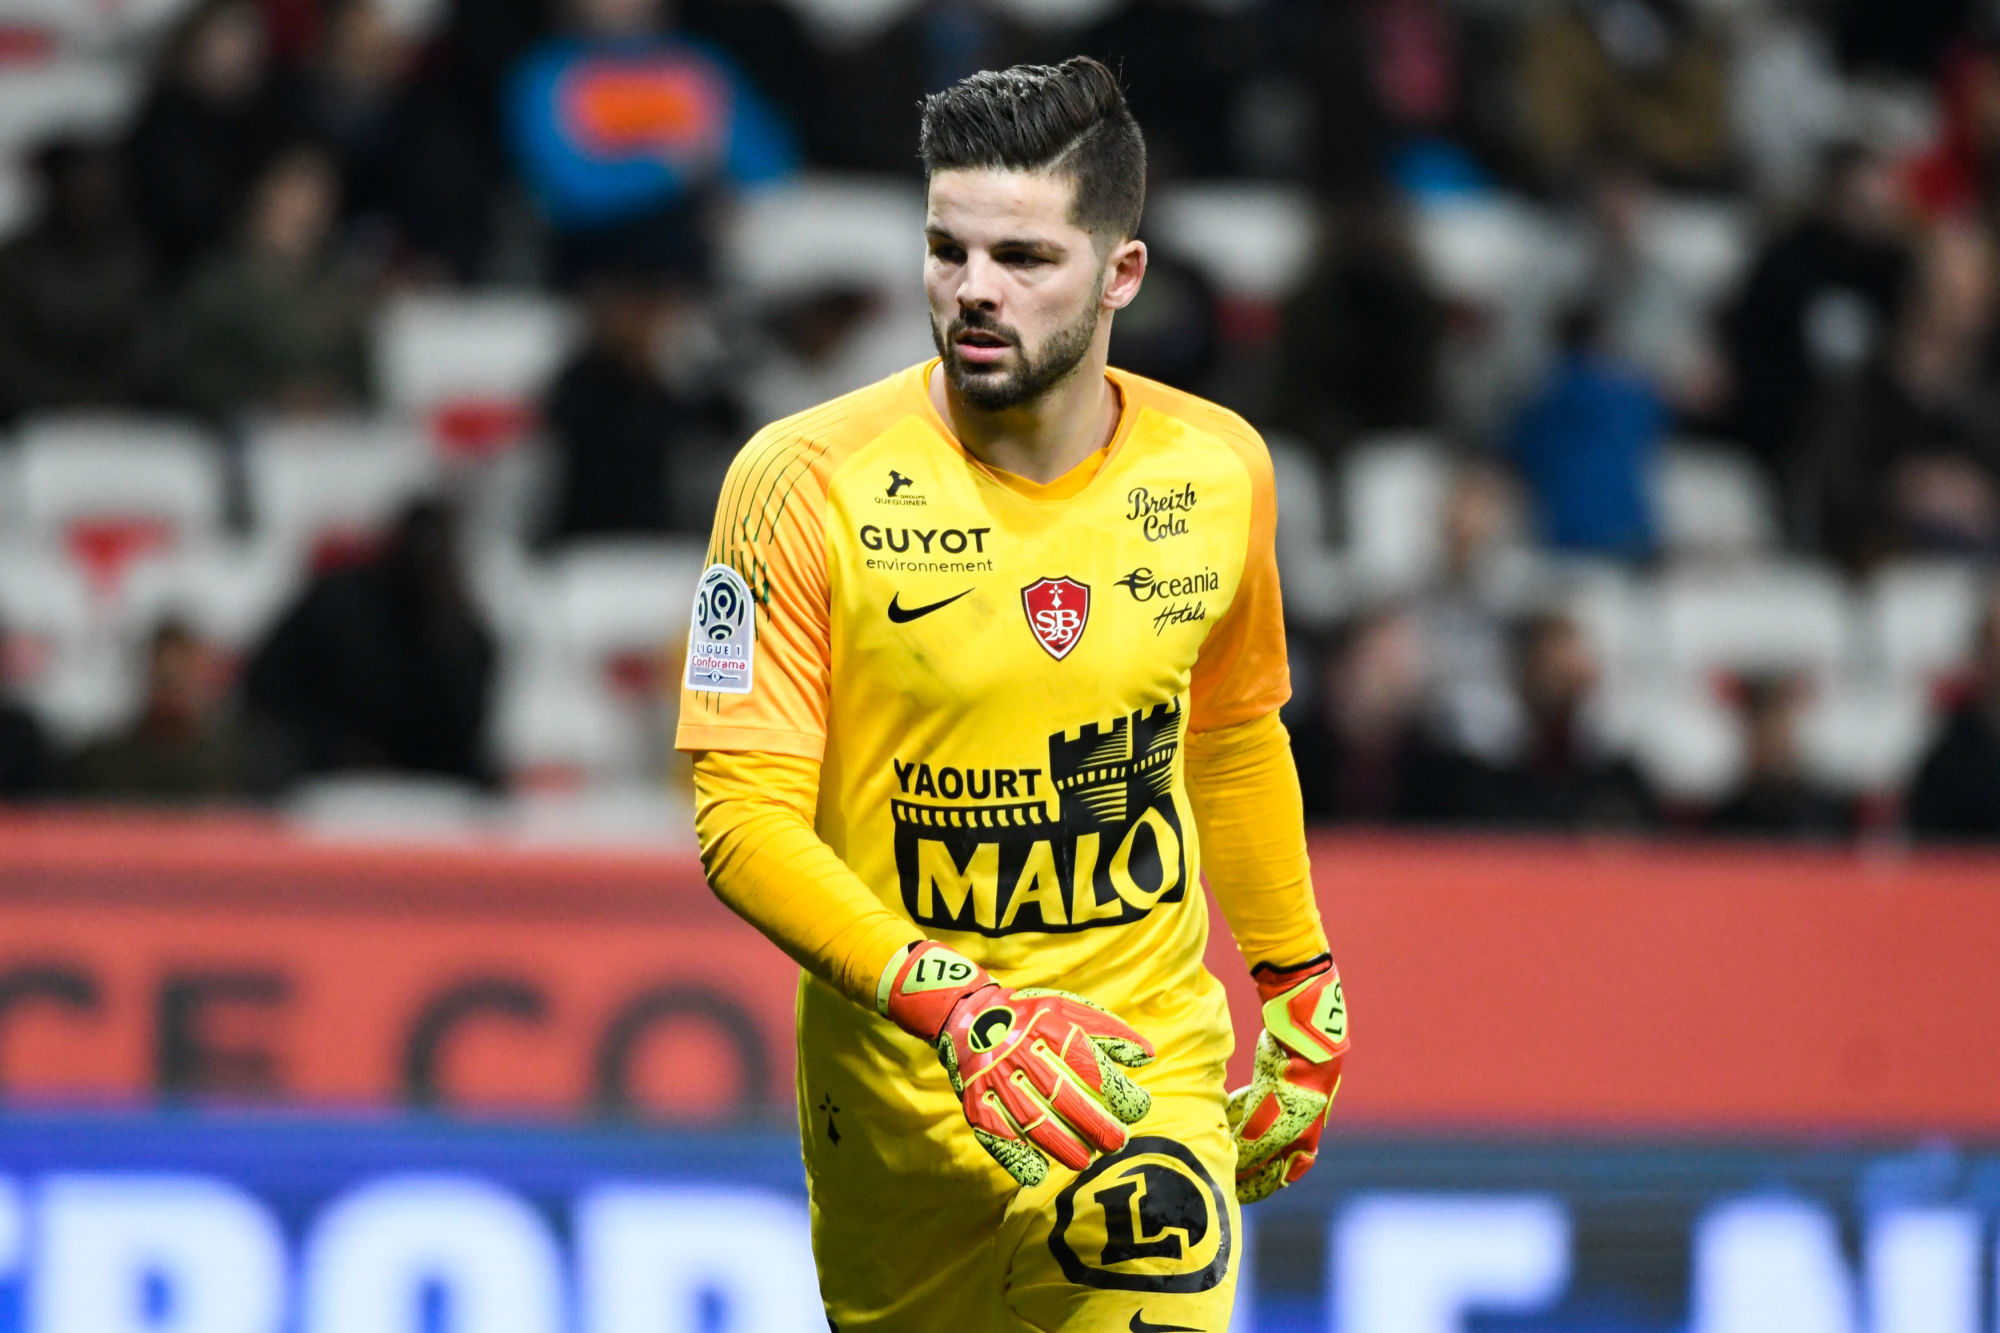 Gautier LARSONNEUR of Brest during the Ligue 1 match between OGC Nice and Brest on February 21, 2020 in Nice, France. (Photo by Pascal Della Zuana/Icon Sport) - Gautier LARSONNEUR - Allianz Riviera - Nice (France)